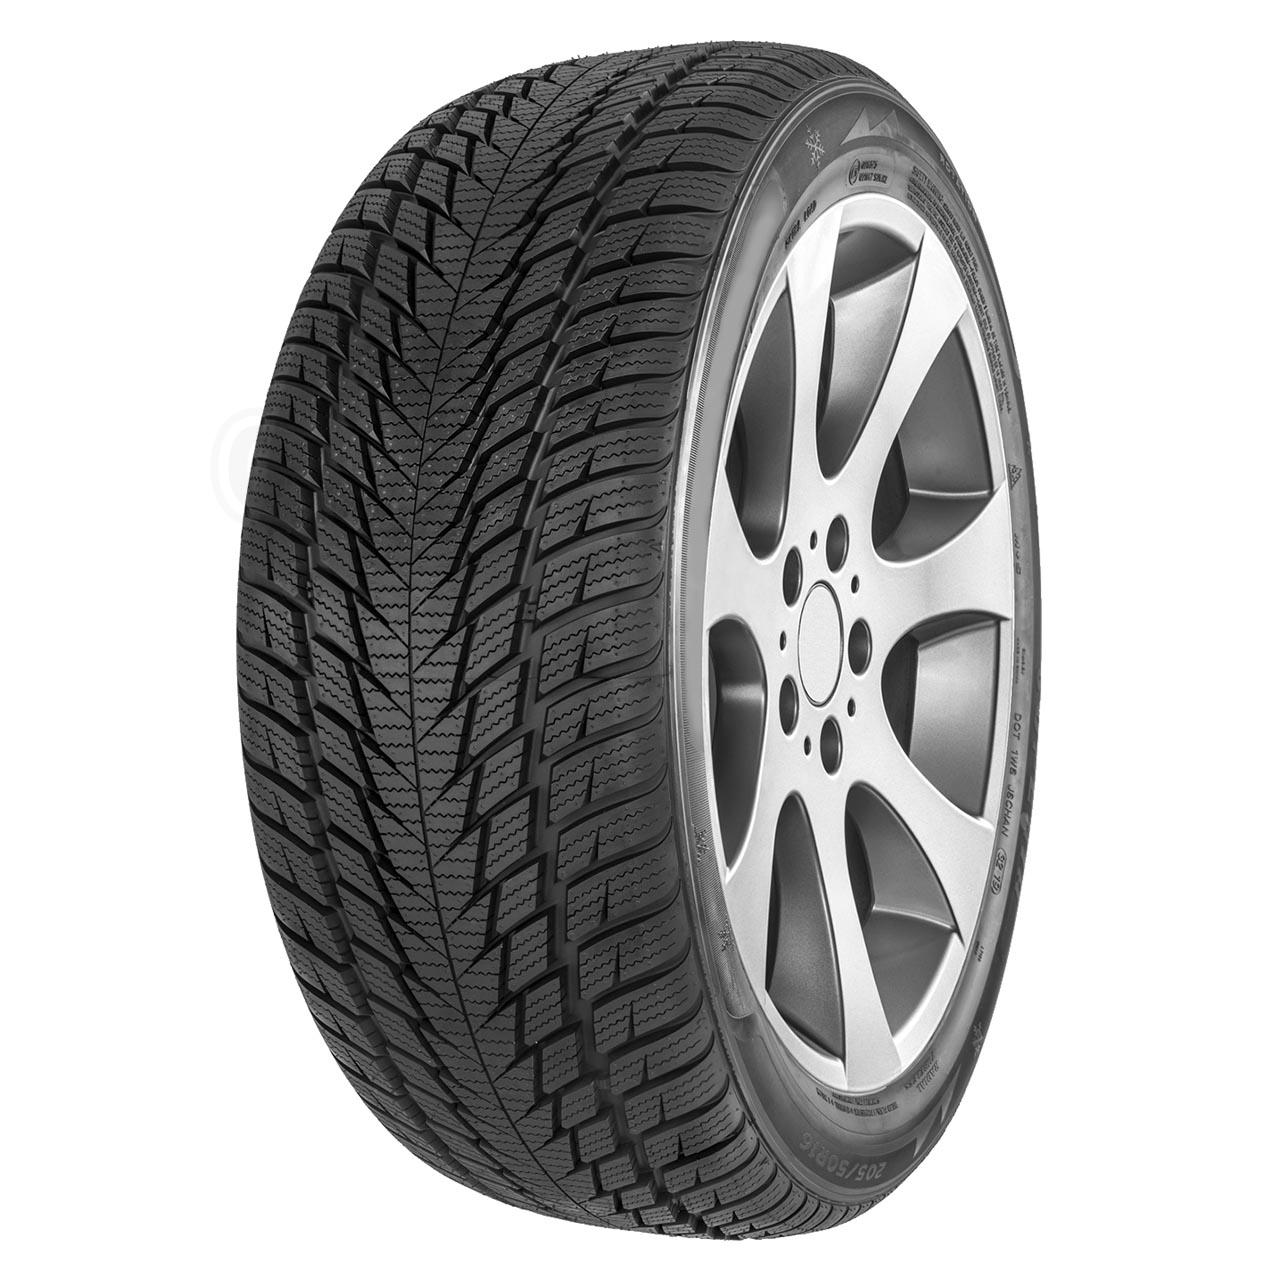 Fortuna Gowin UHP 2 215/45R16 90V XL